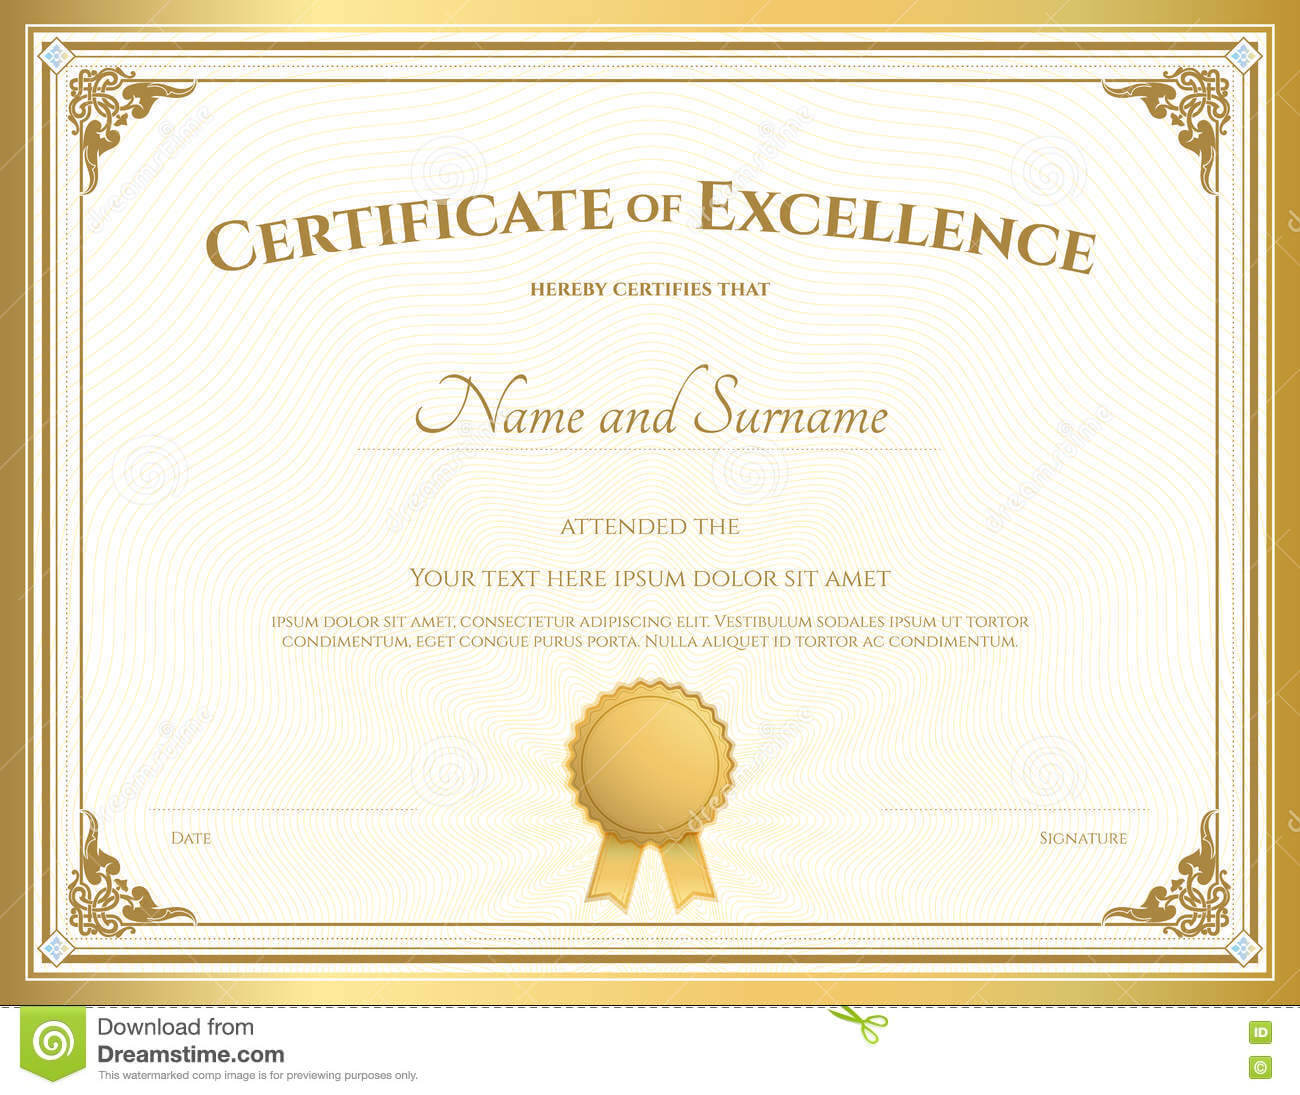 Certificate Of Excellence Template With Gold Border Stock Throughout Free Certificate Of Excellence Template